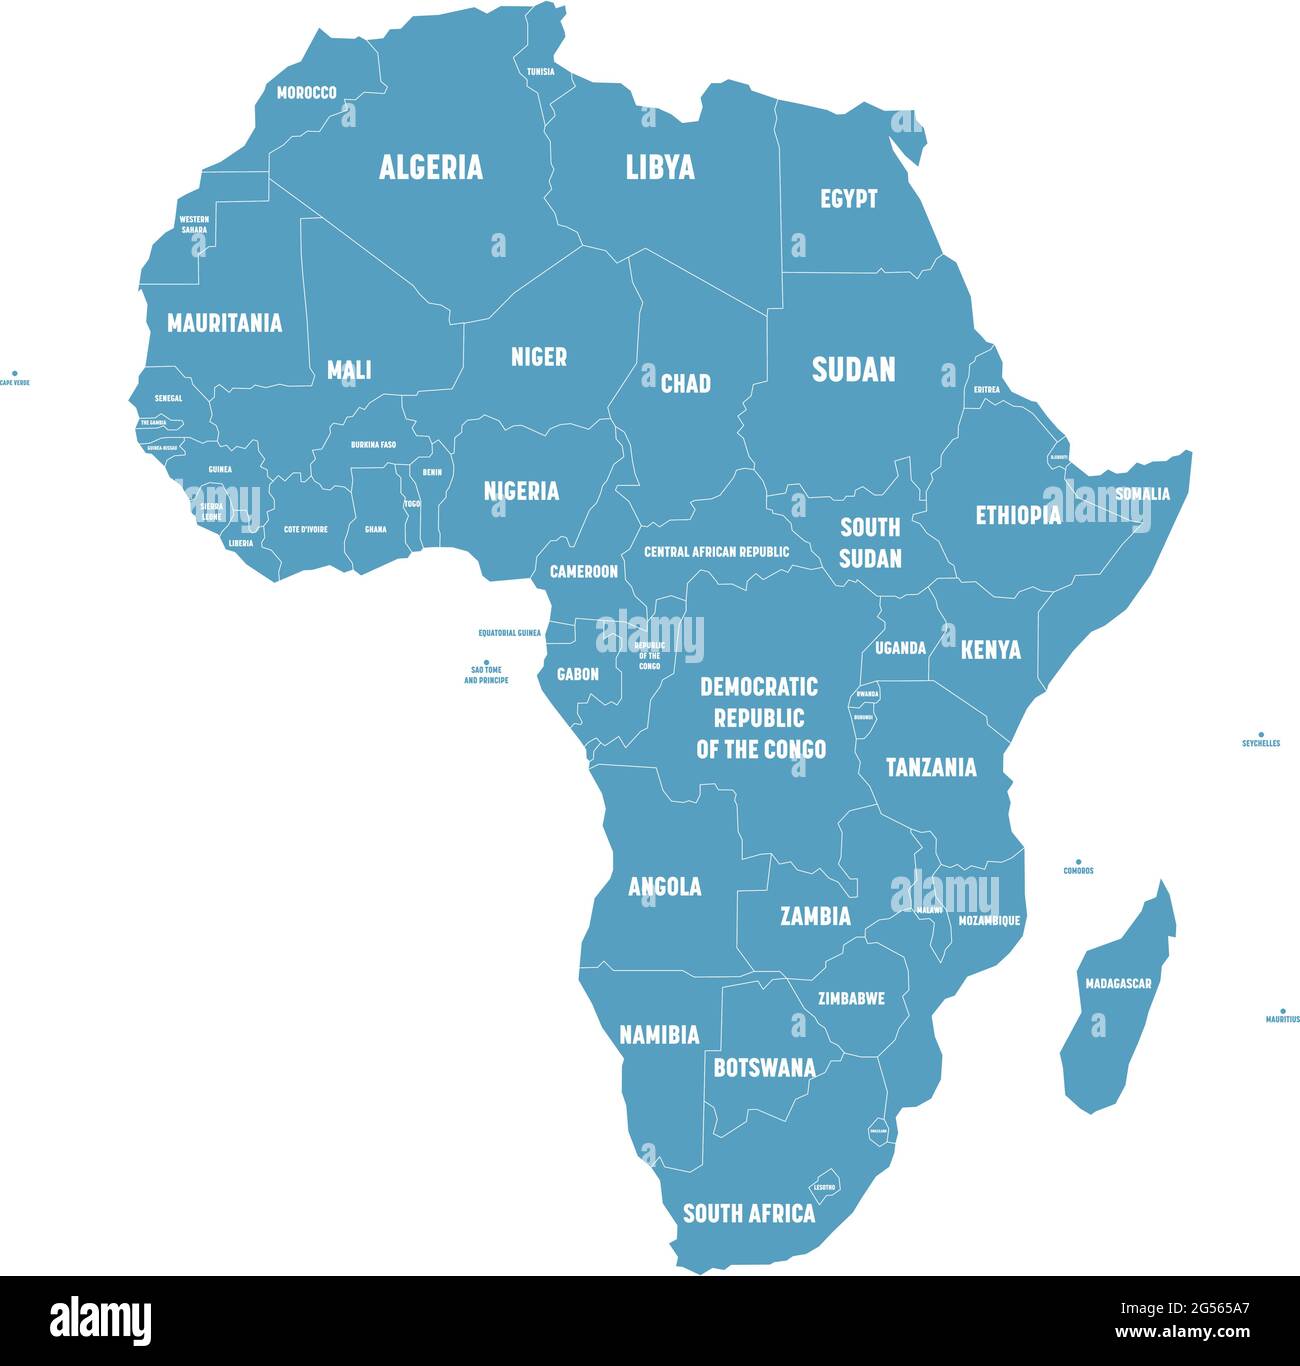 Country africa in a name List of